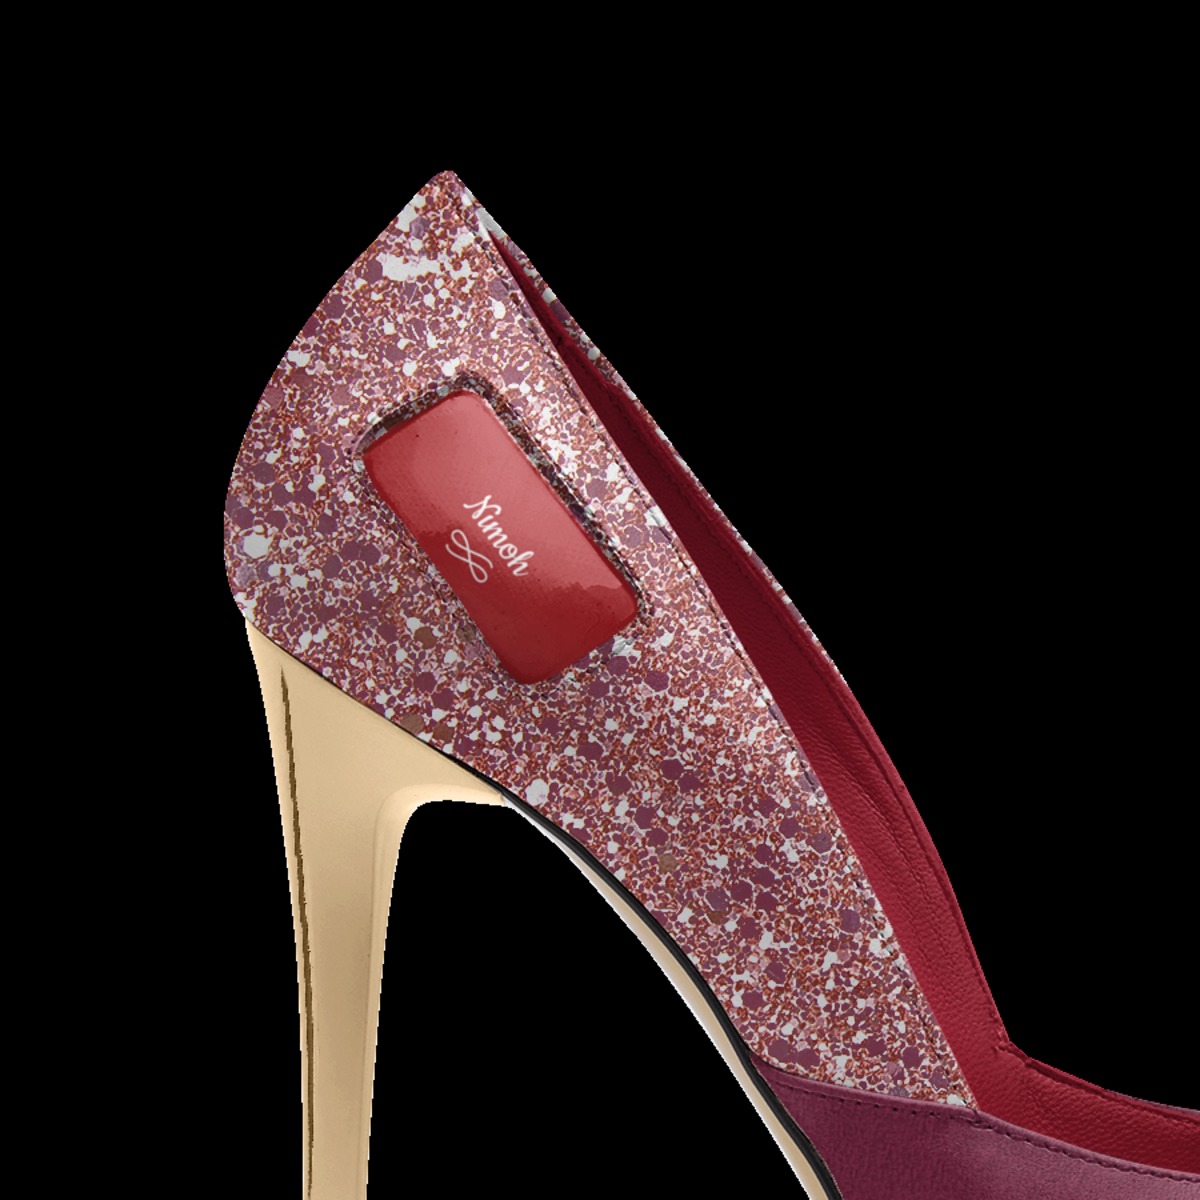 Burgundy Rock Glitter Block Heel With WRAPPED SATIN TIE, Women Wedding Shoes,  Bridesmaids Shoes, Bridal Shoes, Girls Heels, Holiday Shoes - Etsy